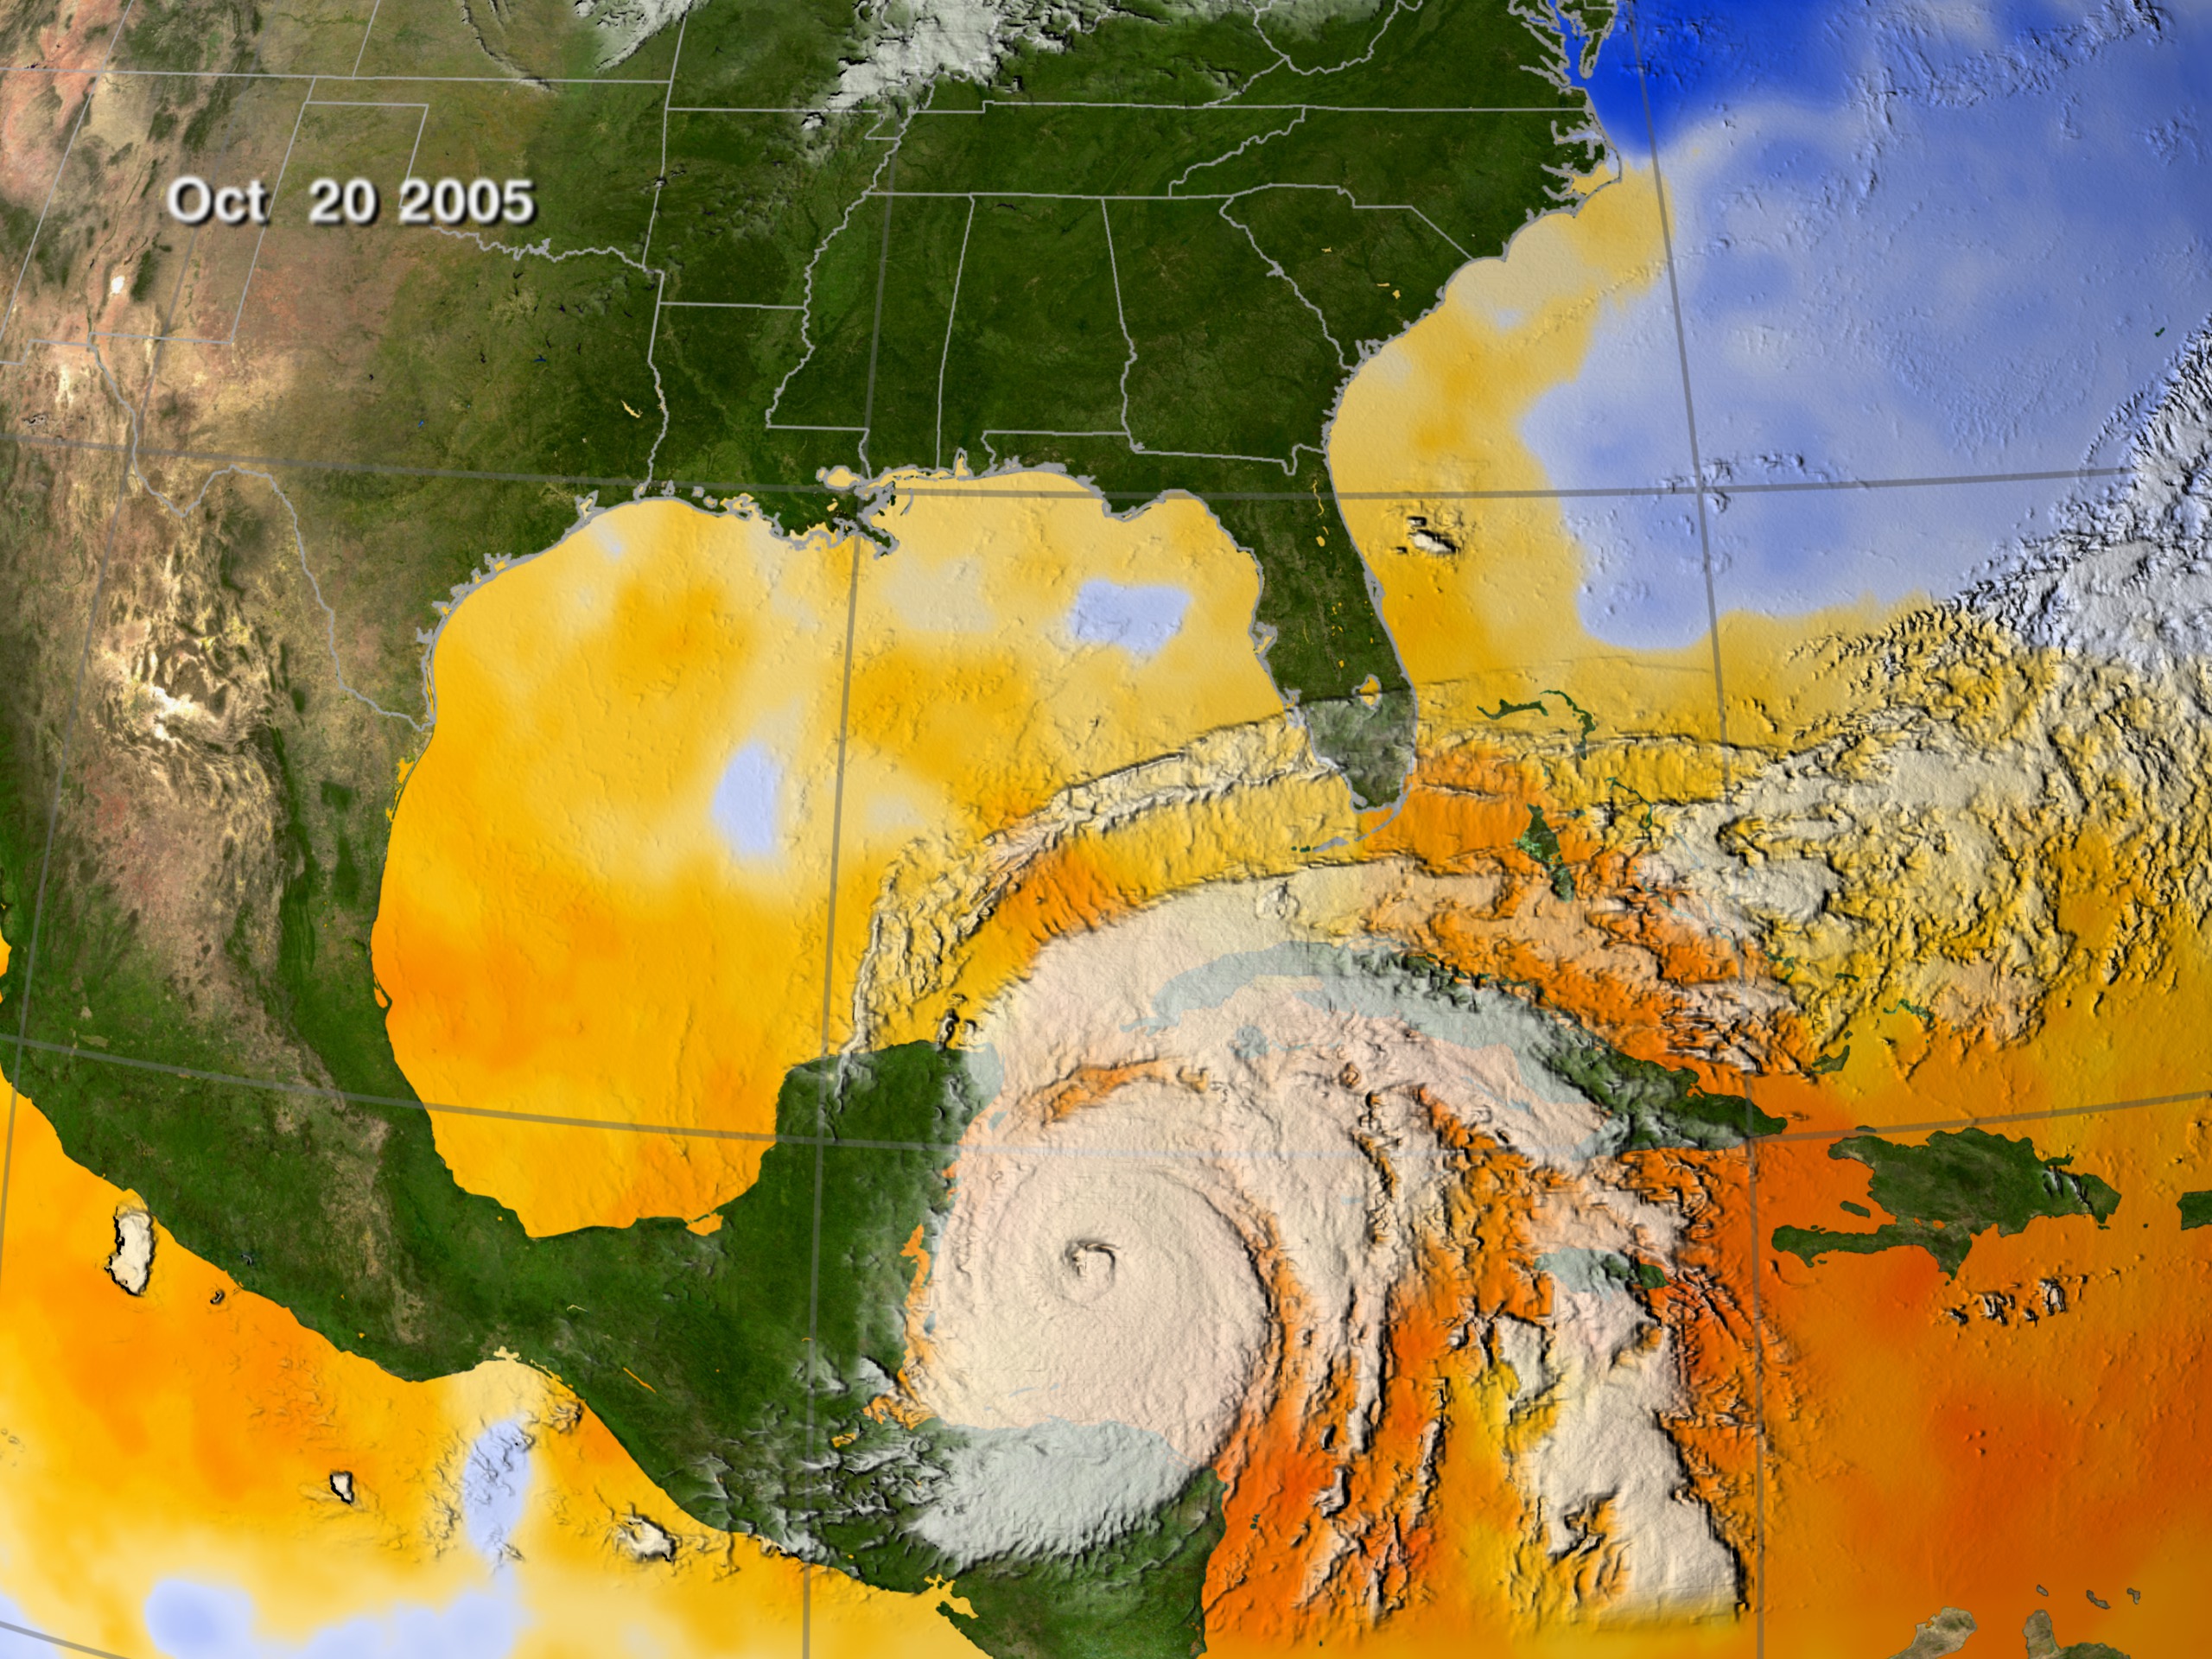 Hurricane Wilma on Oct 20 at 13:34 GMT